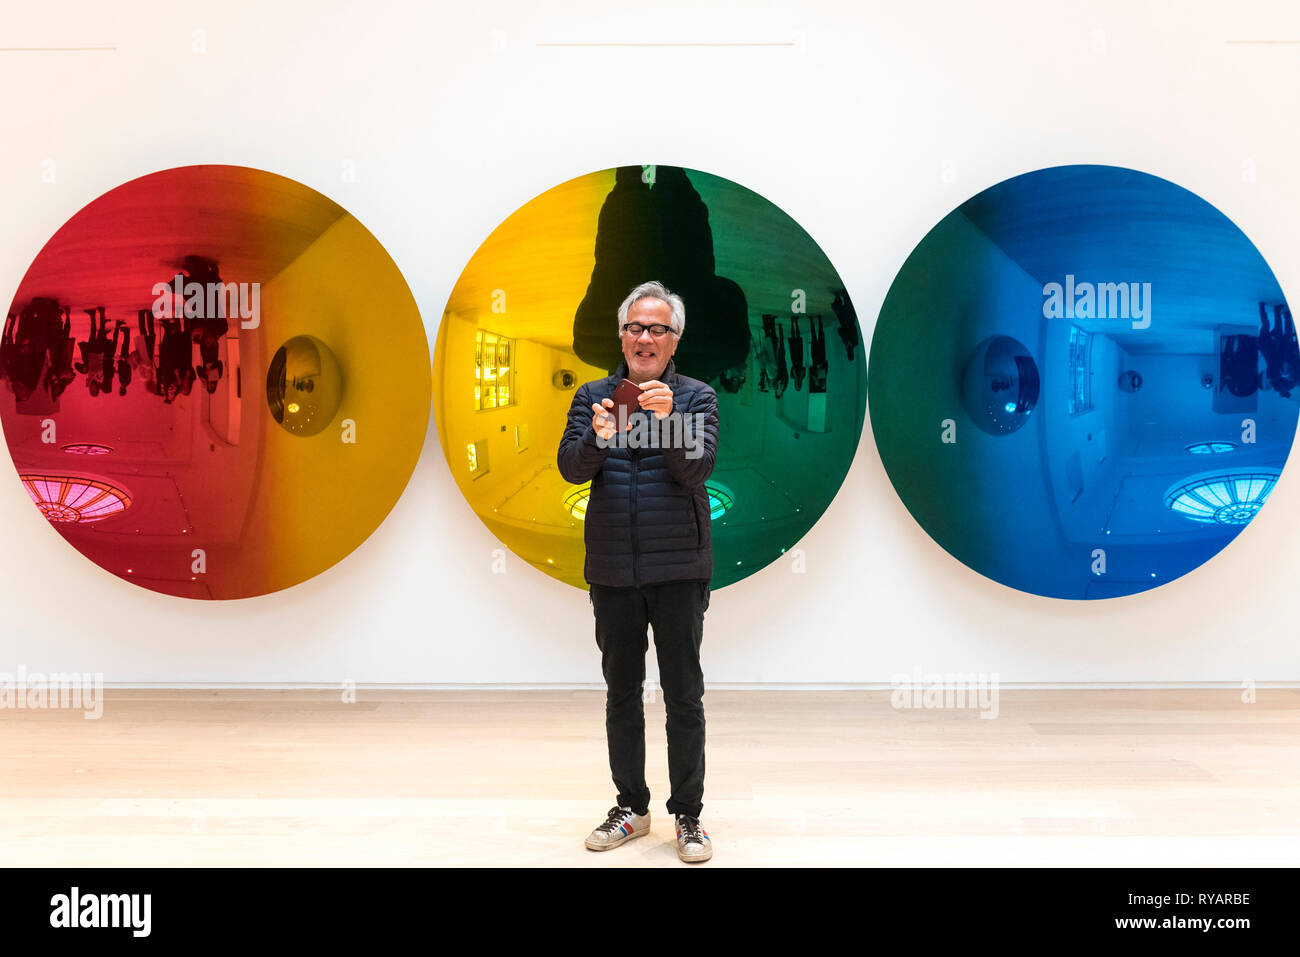 London, UK.  13 March 2019. Anish Kapoor poses next to his work "Red to Blue", 2016.  Photocall for the launch of a solo exhibition by Anish Kapoor, at the restored Pitzhanger Manor and Gallery, in Ealing.  The exhibition runs 16 March to 18 August 2019. Credit: Stephen Chung / Alamy Live News Stock Photo